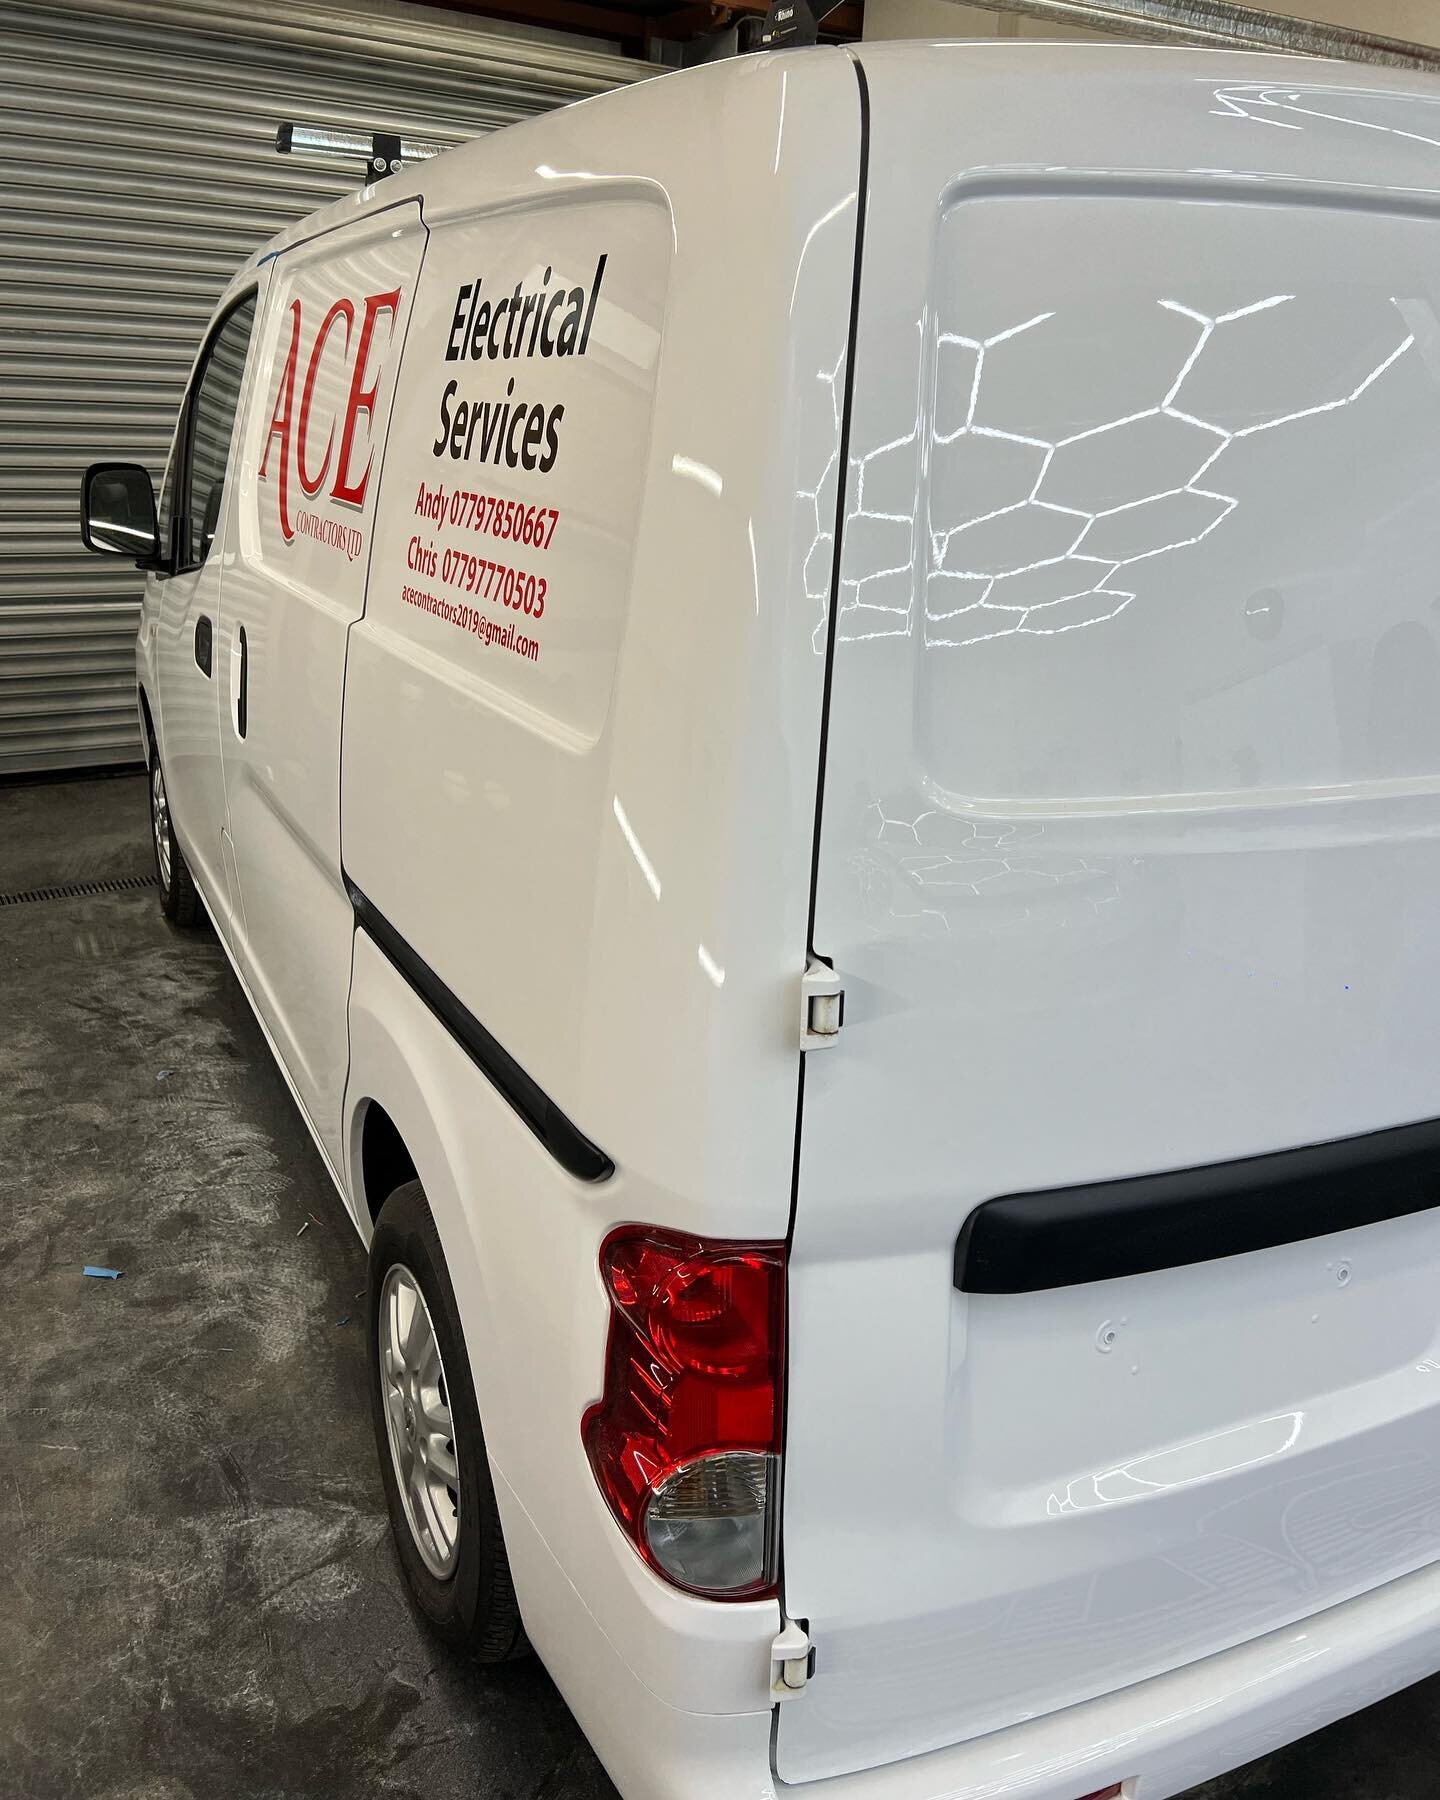 We recently paint corrected and ceramic coated 3 work vans for the lads at Ace Electrical Services. First impressions are everything and these vans look amazing! Thanks lads they look amazing! 😎👌🏻 #detailing #gyeoncertifieddetailer #workvans #cera